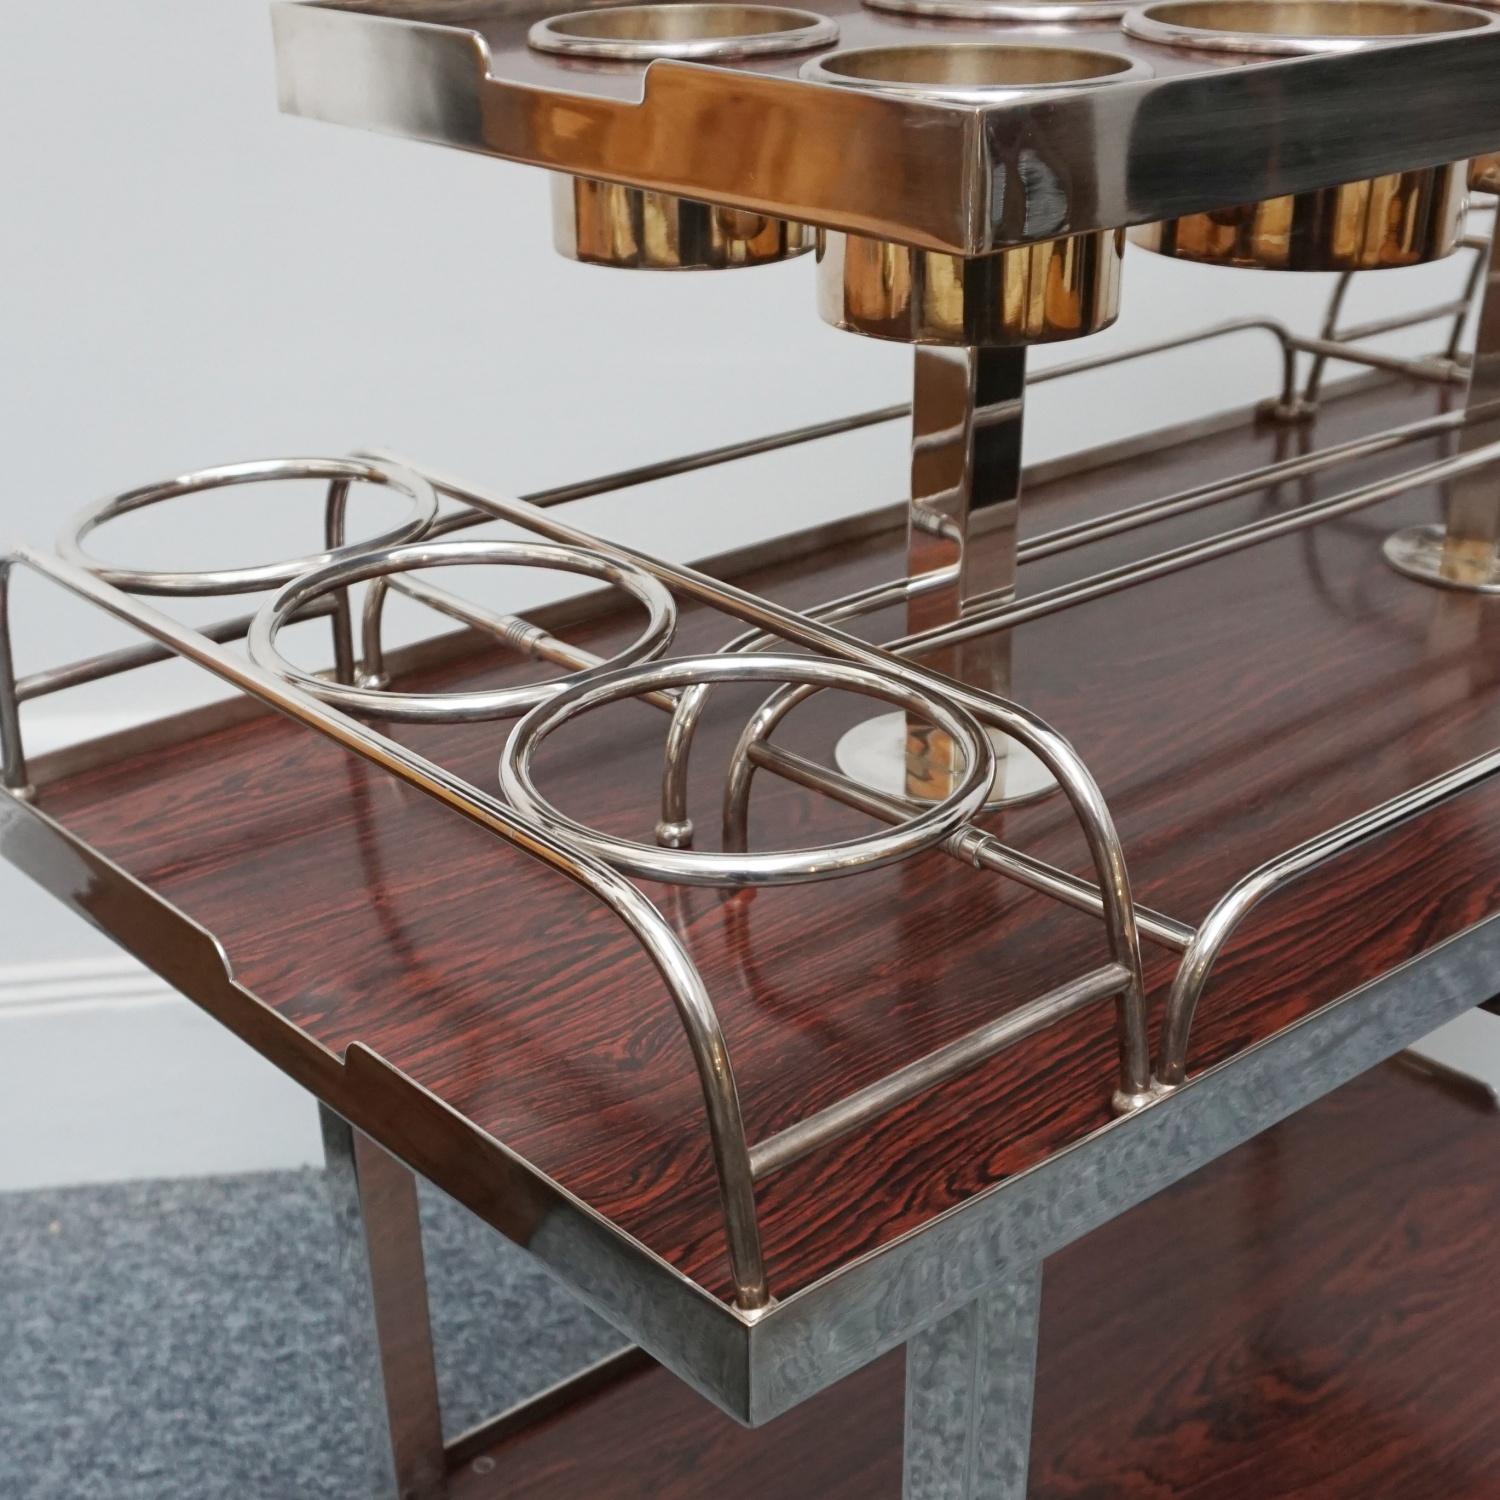 20th Century Mid-Century Silver Plate and Chrome Drinks Trolley by Drakes Silversmiths